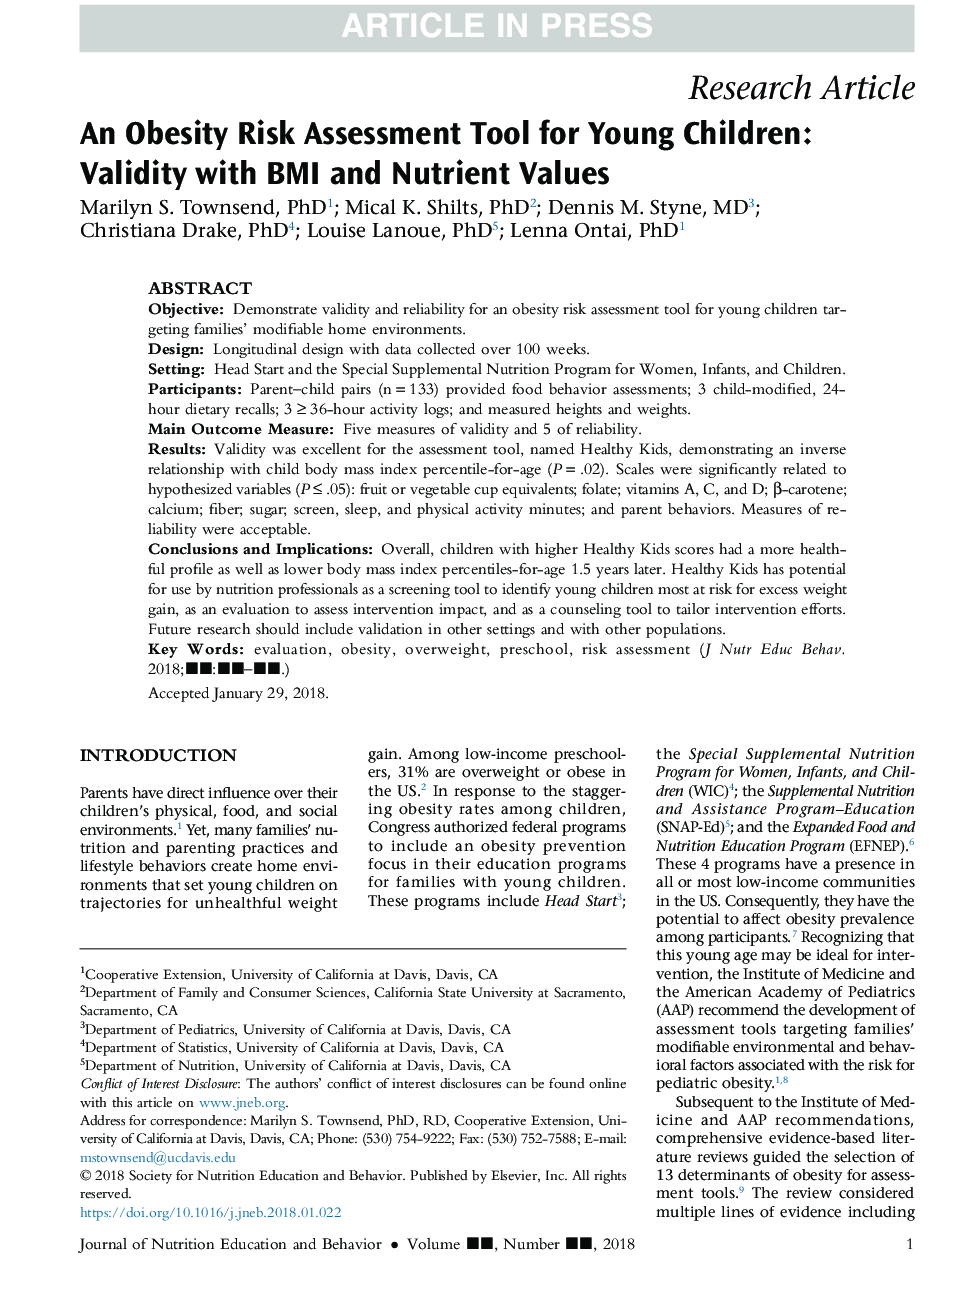 An Obesity Risk Assessment Tool for Young Children: Validity With BMI and Nutrient Values